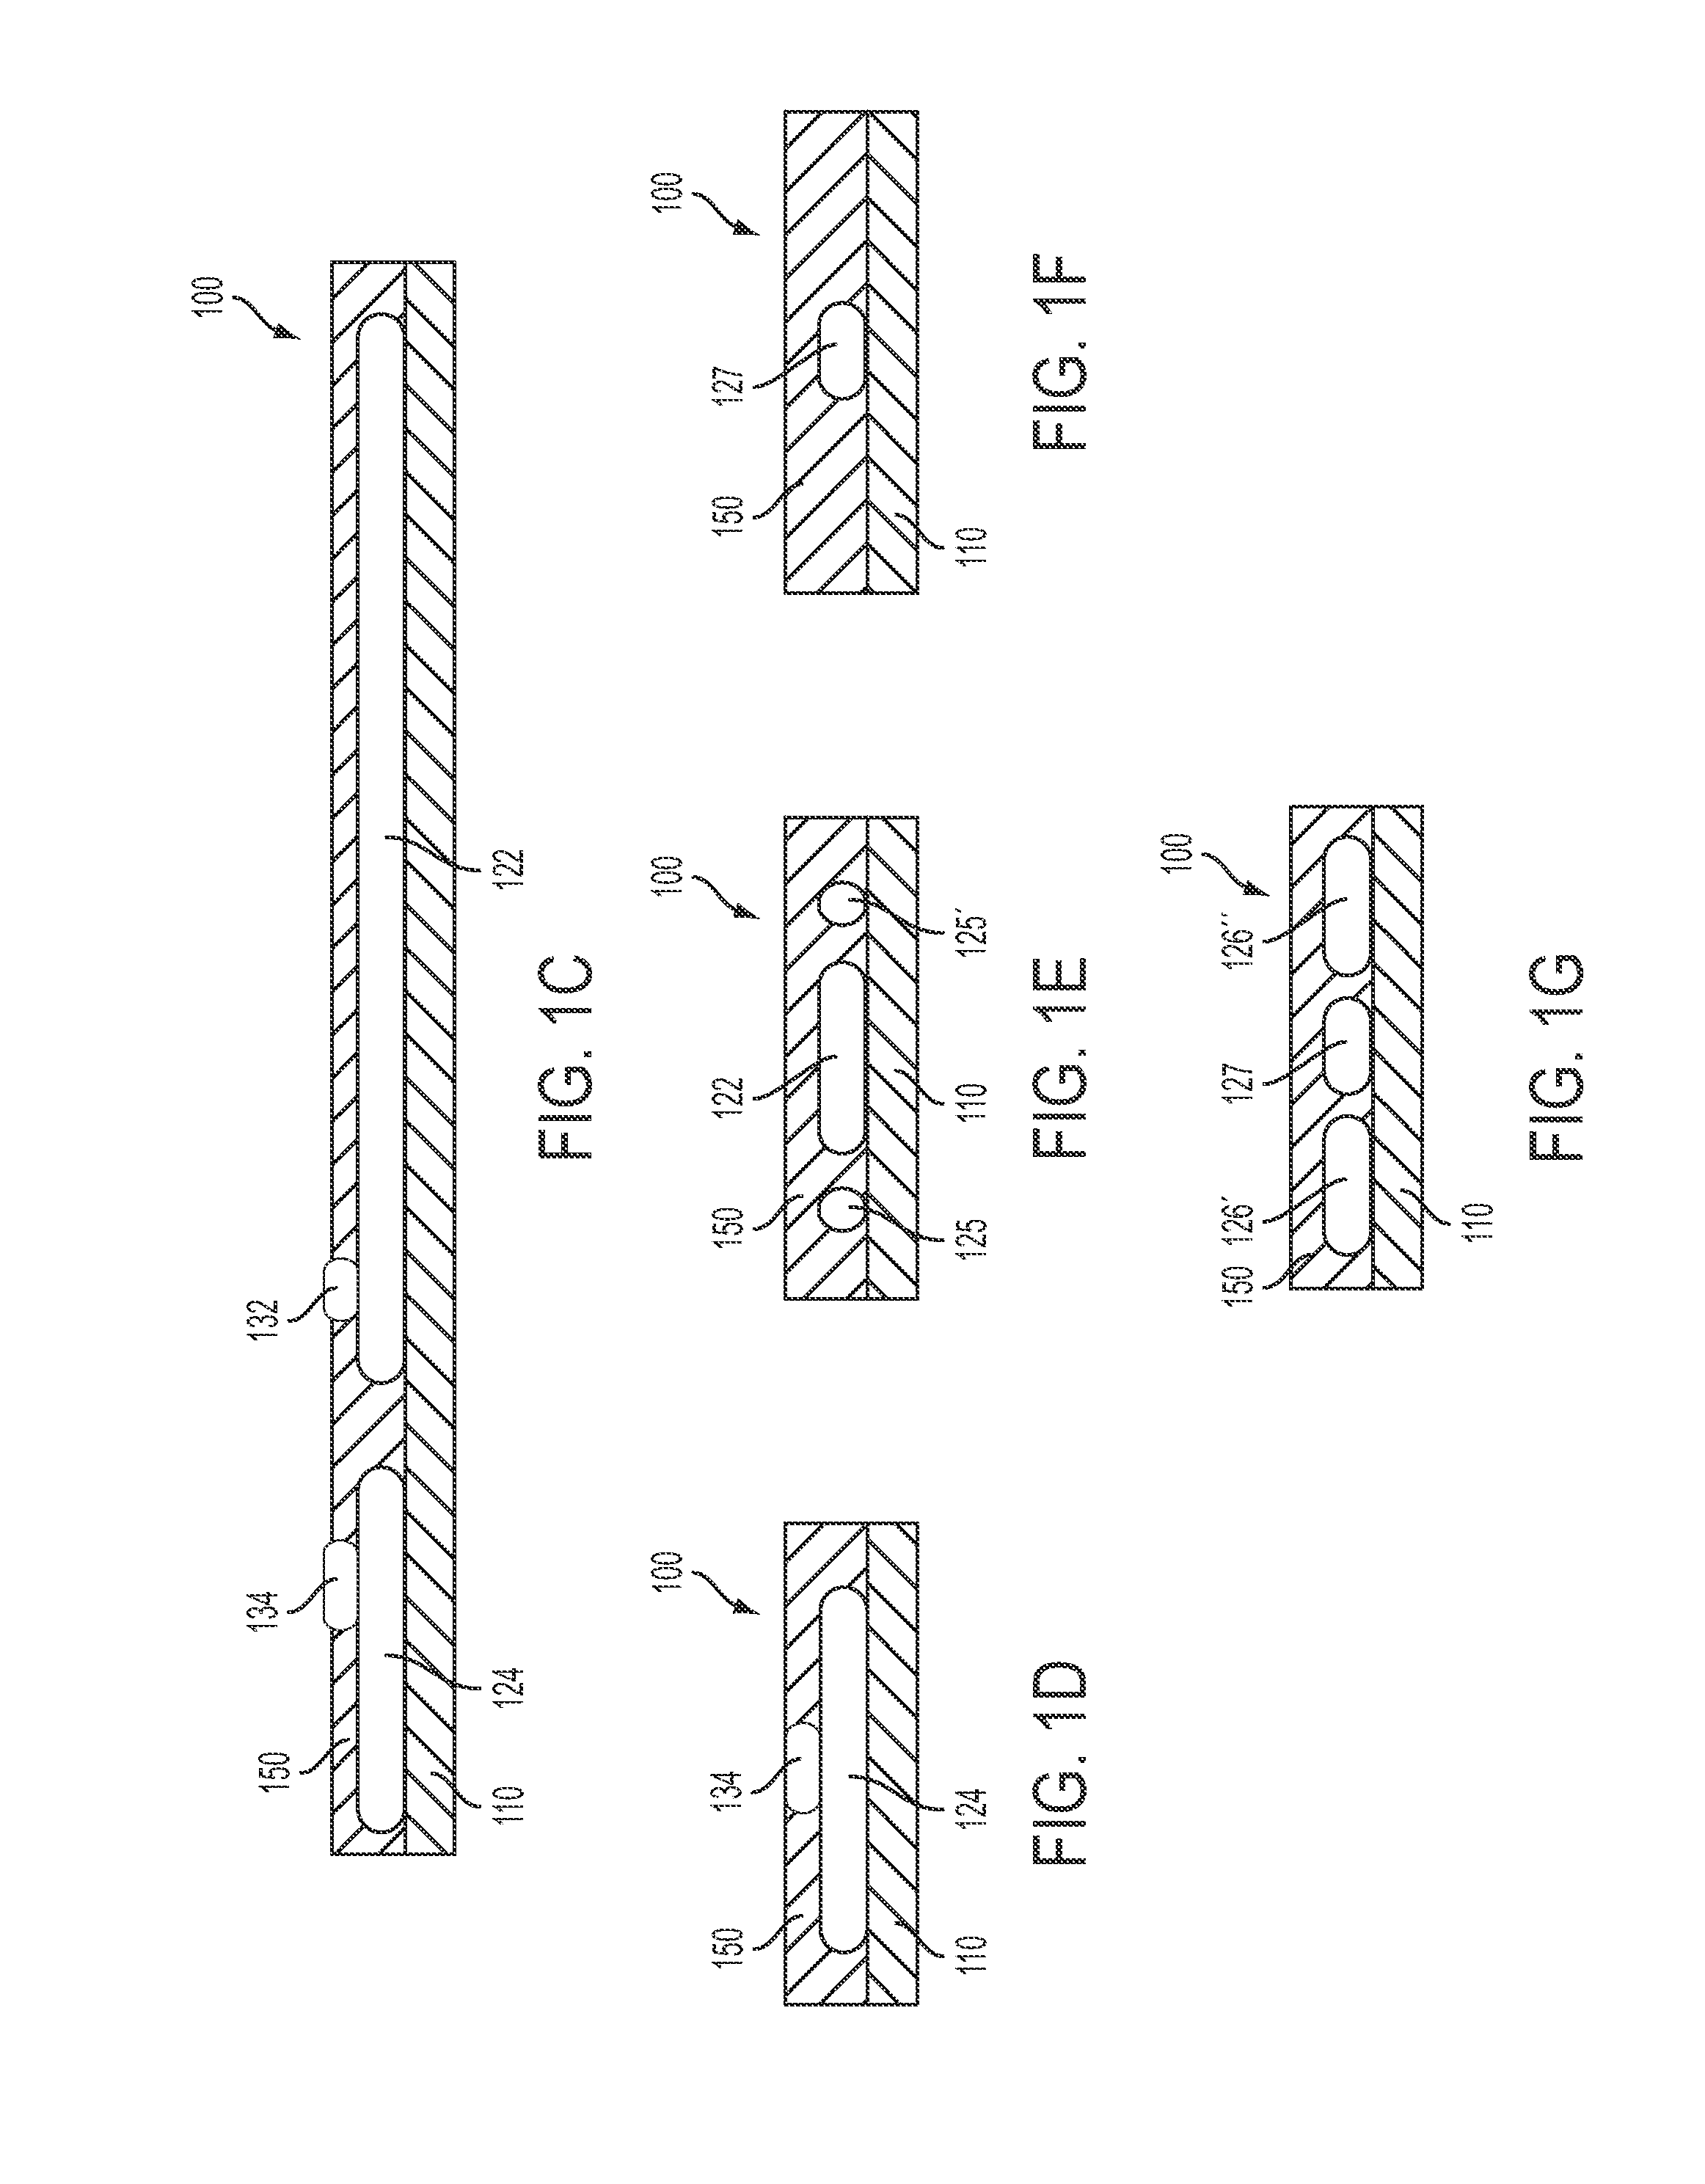 Dual-Band Series-Aligned Complementary Double-V Antenna, Method of Manufacture and Kits Therefor